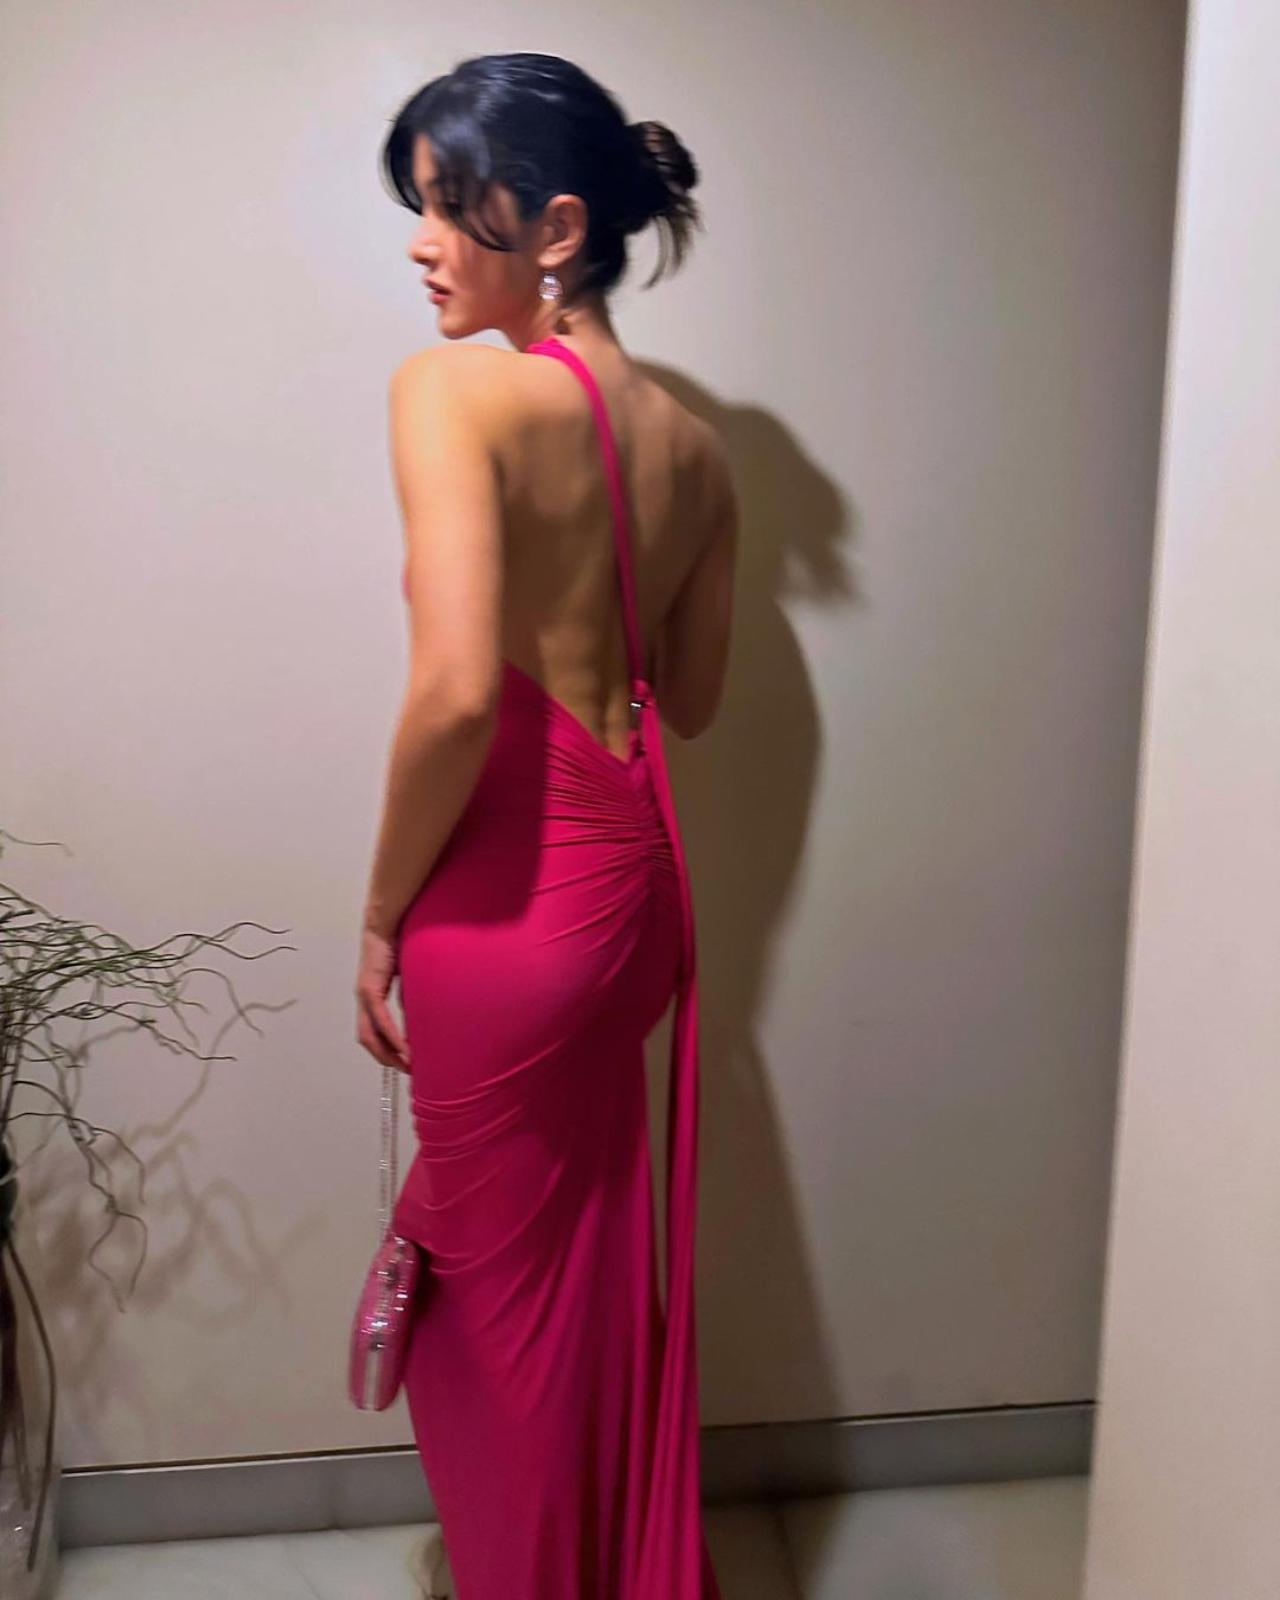 The dress was backless and in one of the photos Shanaya flaunted her bare back. Kapoor is quite active on social media and gives her followers an insight into her life